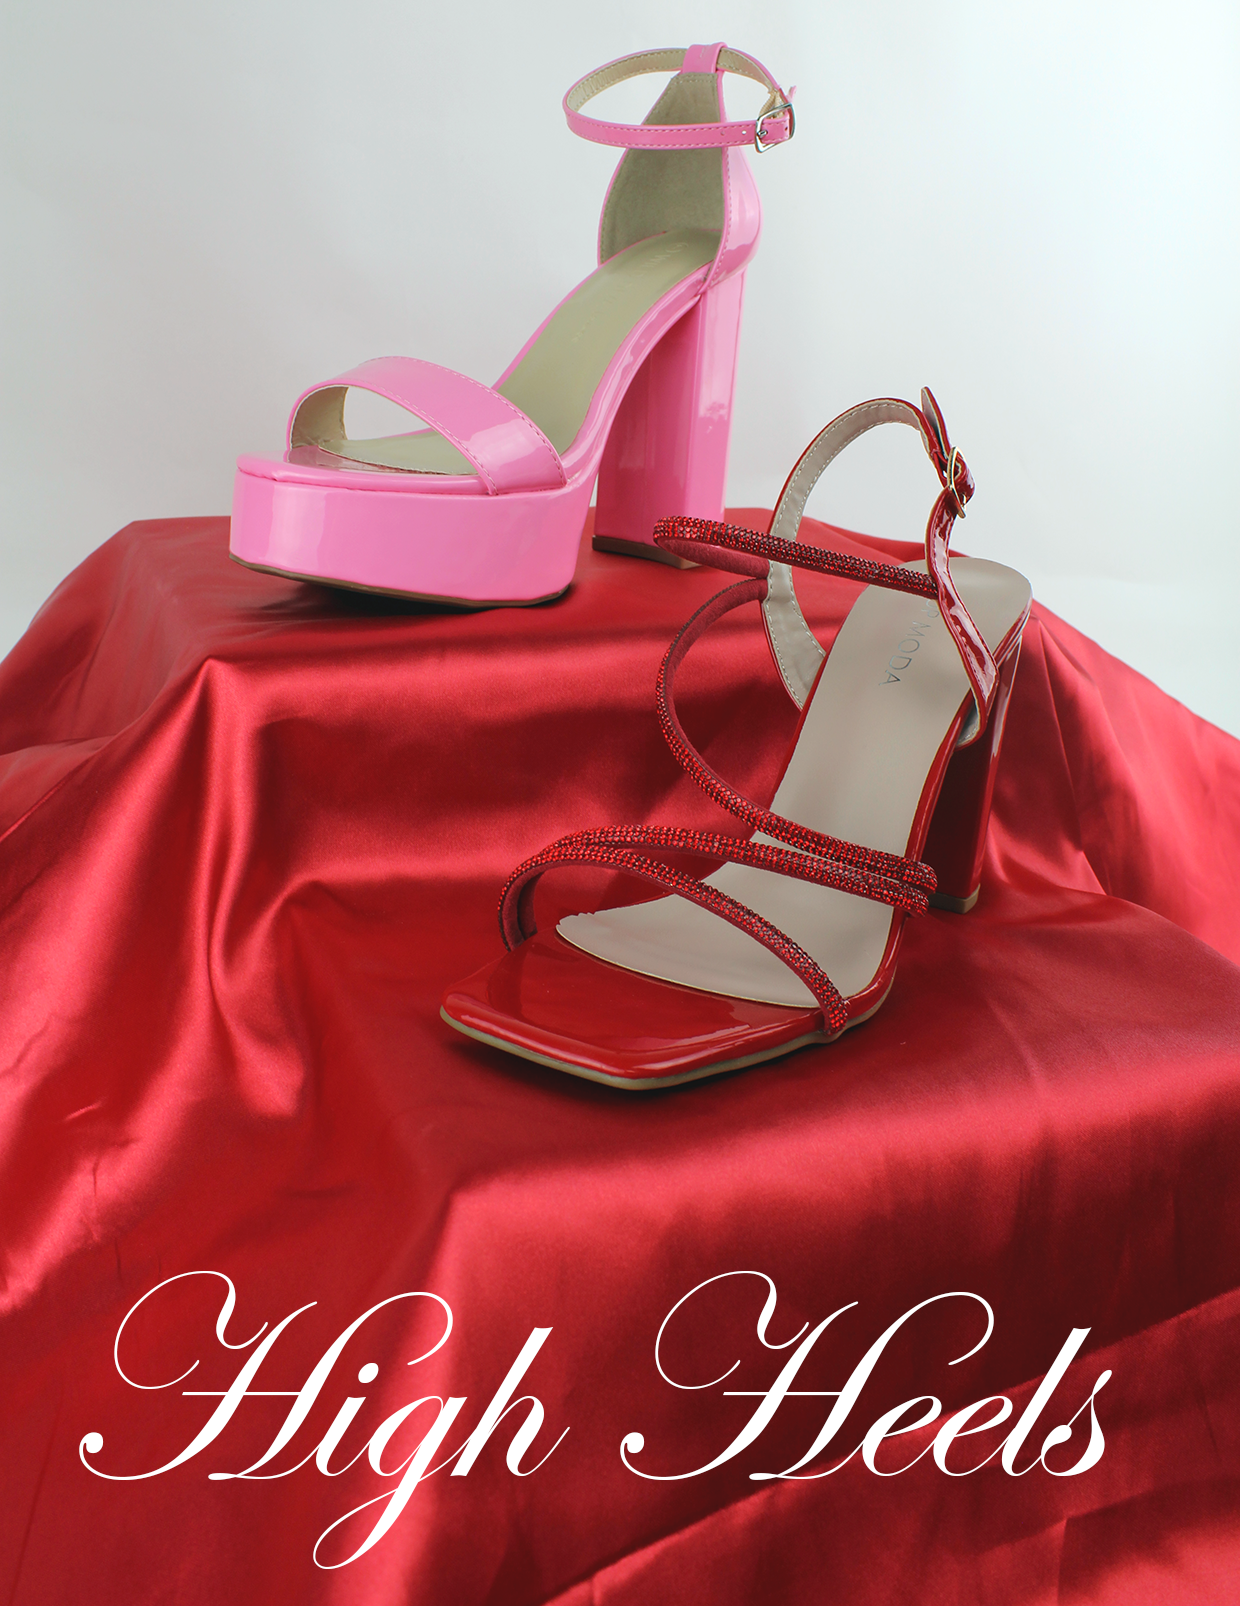 High Heels for Valentine's Day